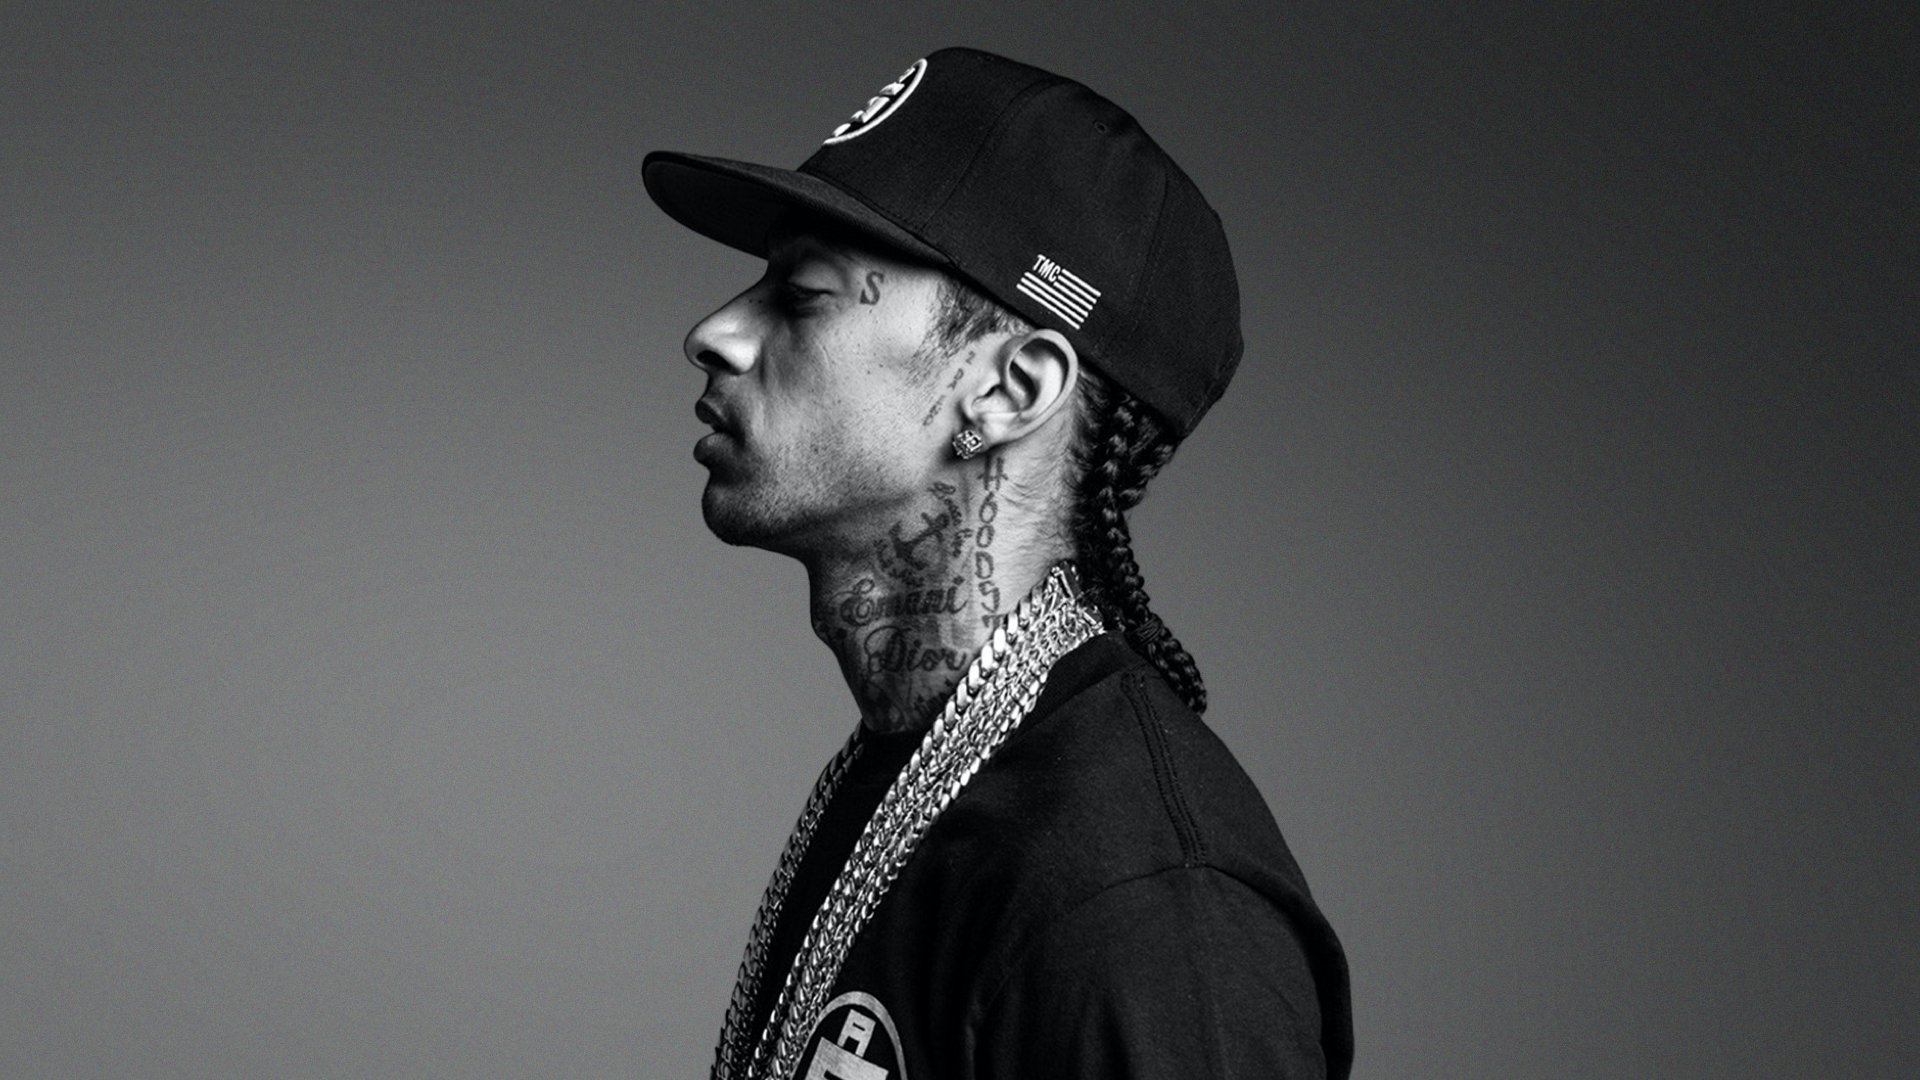 TIDAL year ago today, we lost Nipsey Hussle—someone near and dear to the TIDAL family. Today, we celebrate his life and legacy